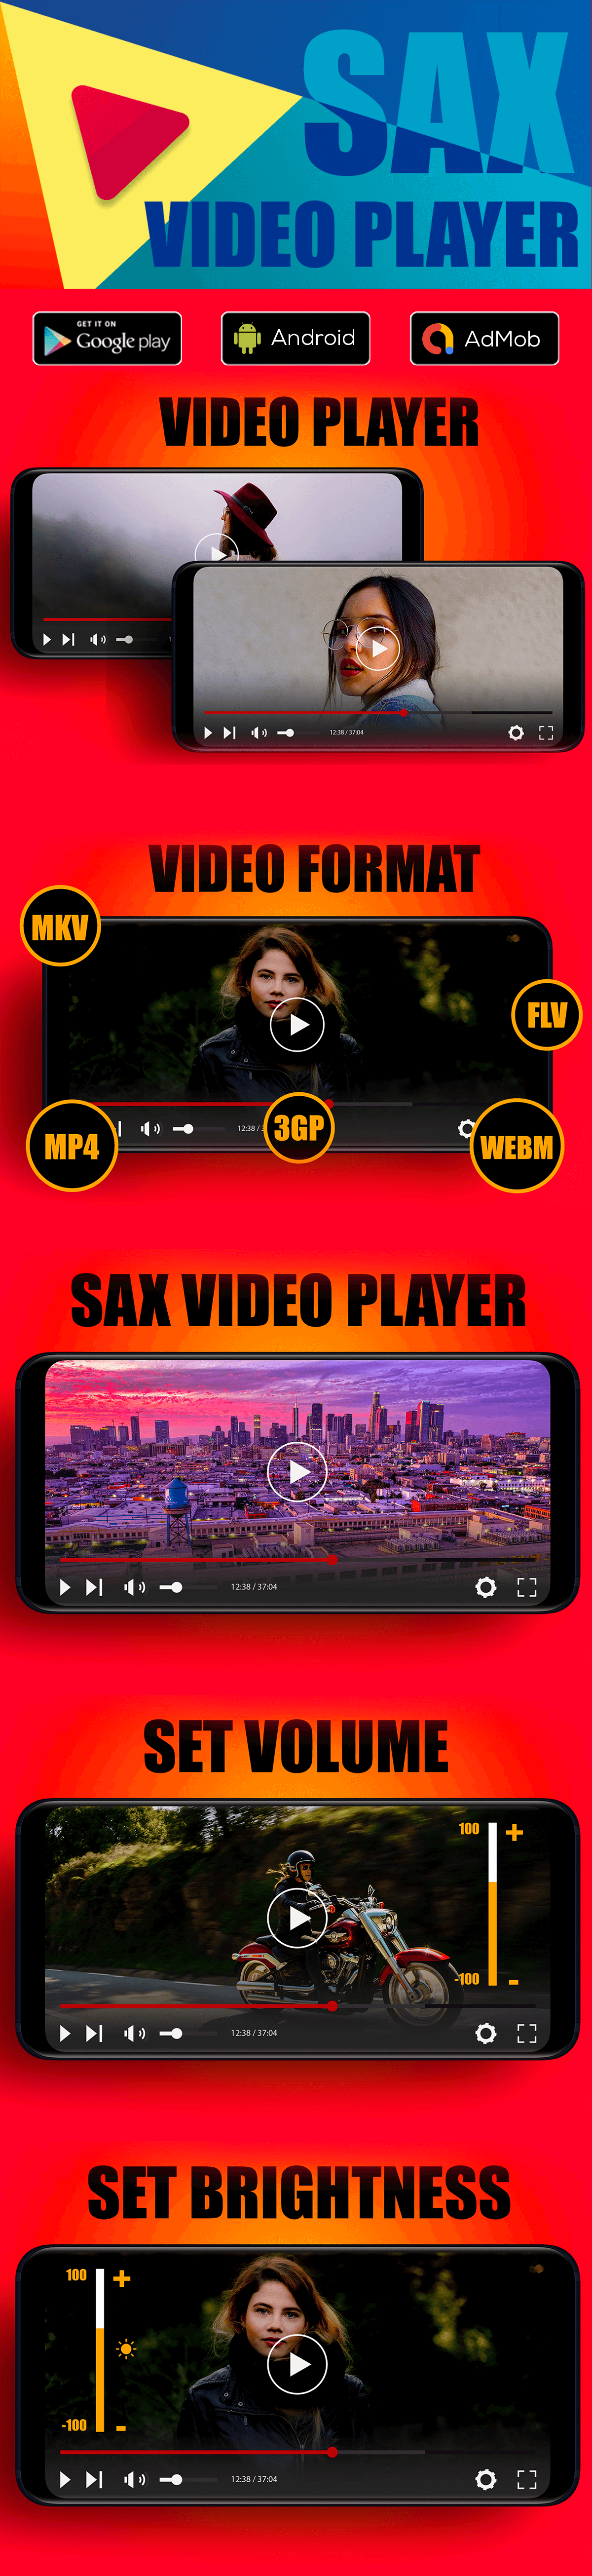 HD Video Player | SX Video Player  | Android Full Application with documentation | Admob Ads - 1